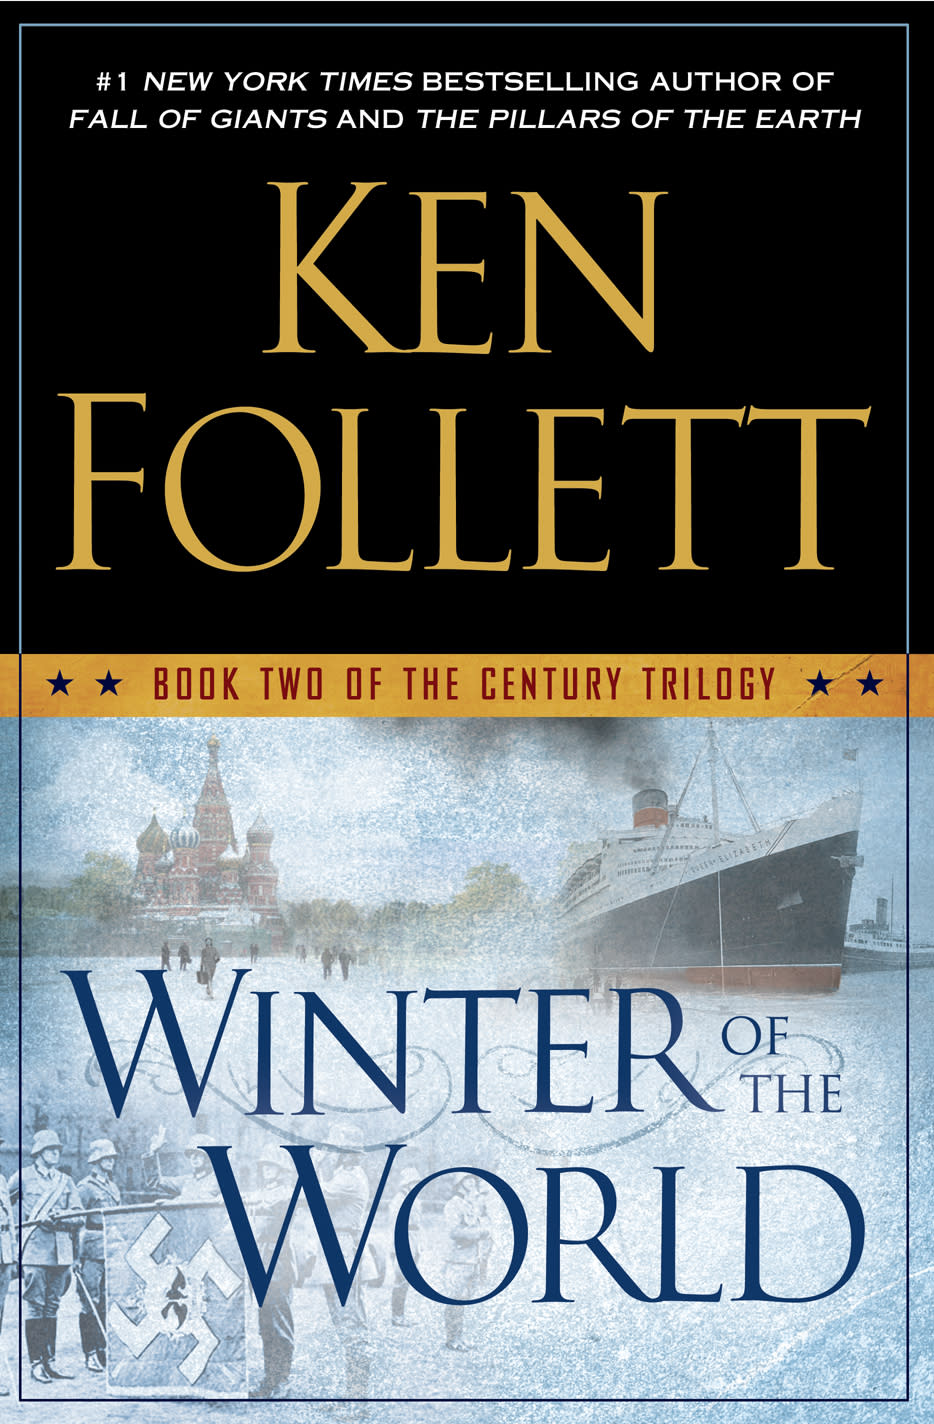 This book cover image released by Dutton shows "Winter of the World," by Ken Follett. The book, the second of his "Century" trilogy on war, will be released on Sept. 18. (AP Photo/Dutton)